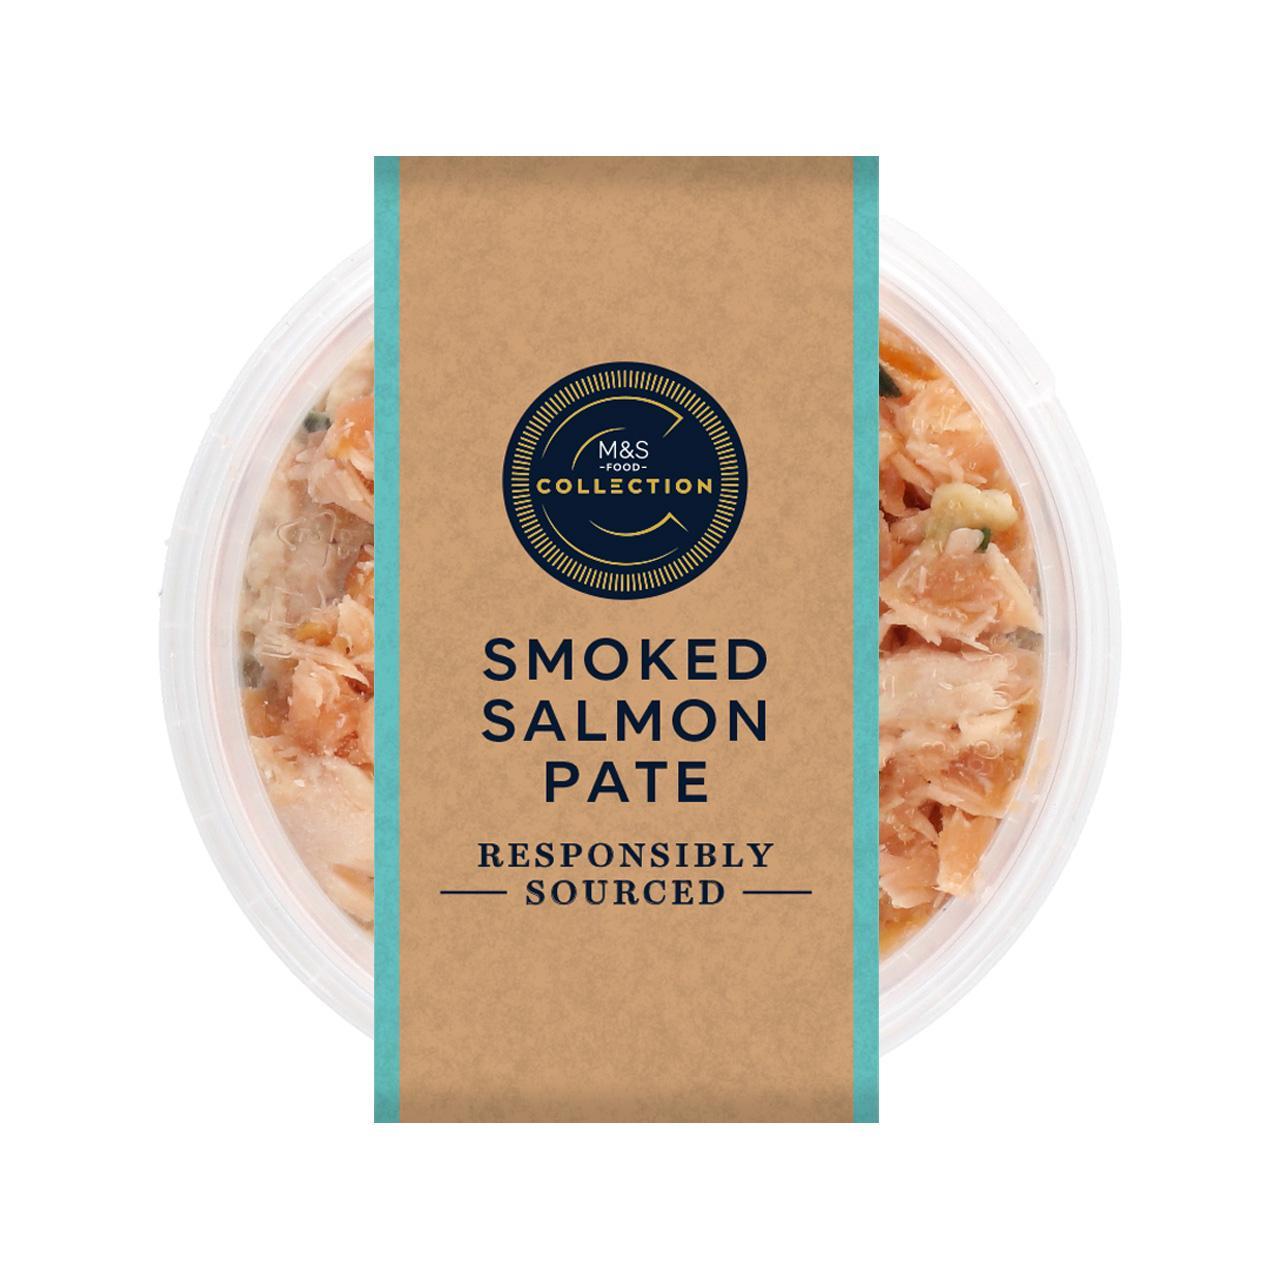 M&S Collection Smoked Salmon Pate